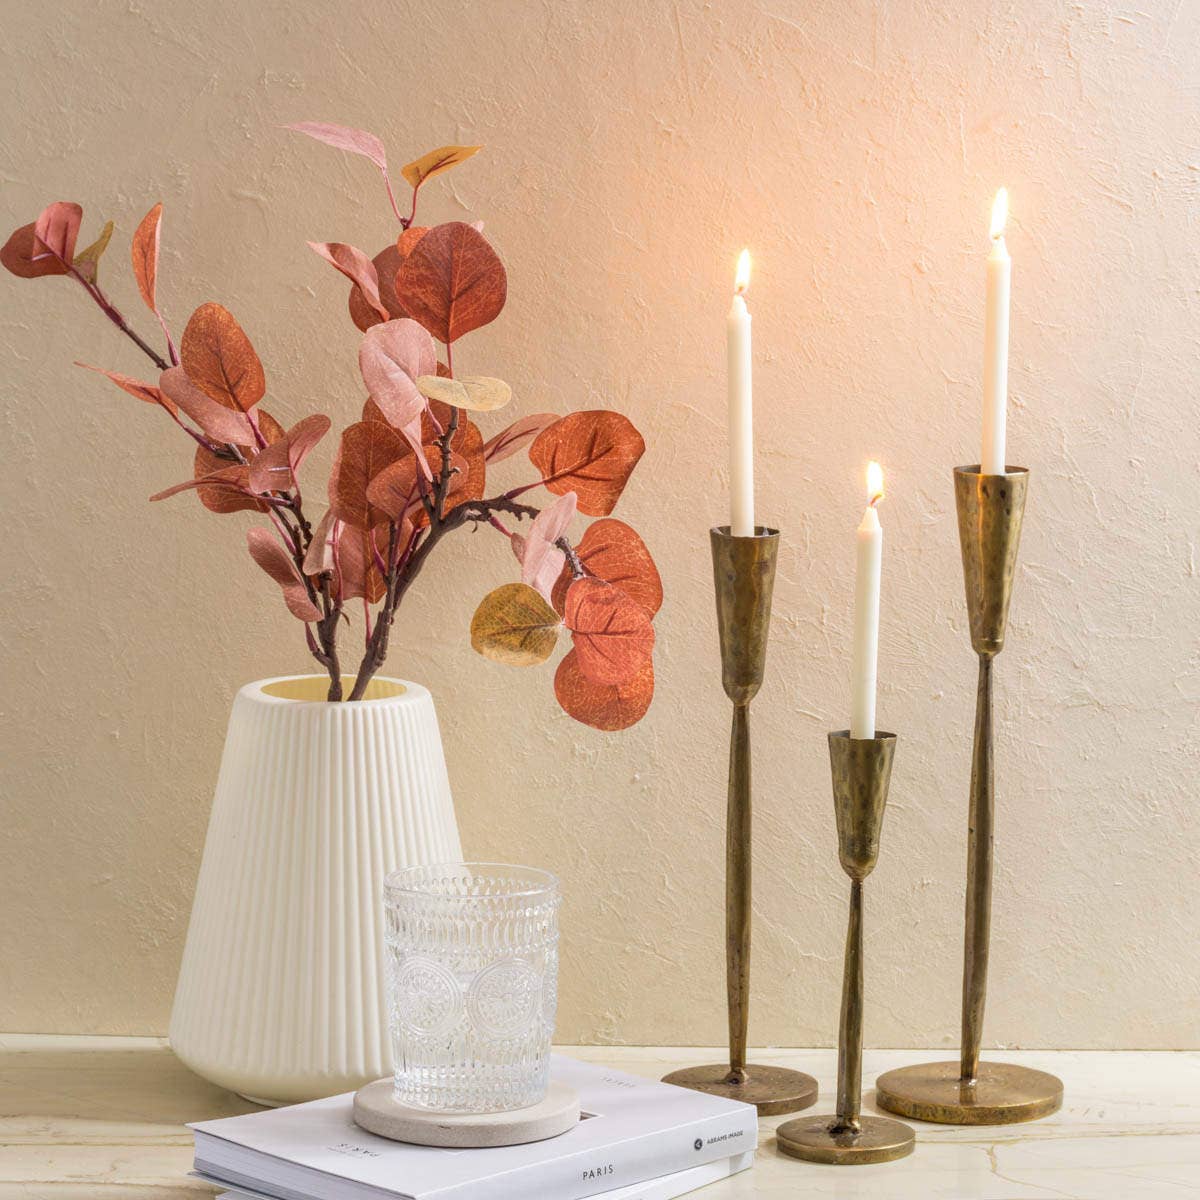 Purchase Wholesale brass candlestick. Free Returns & Net 60 Terms on Faire